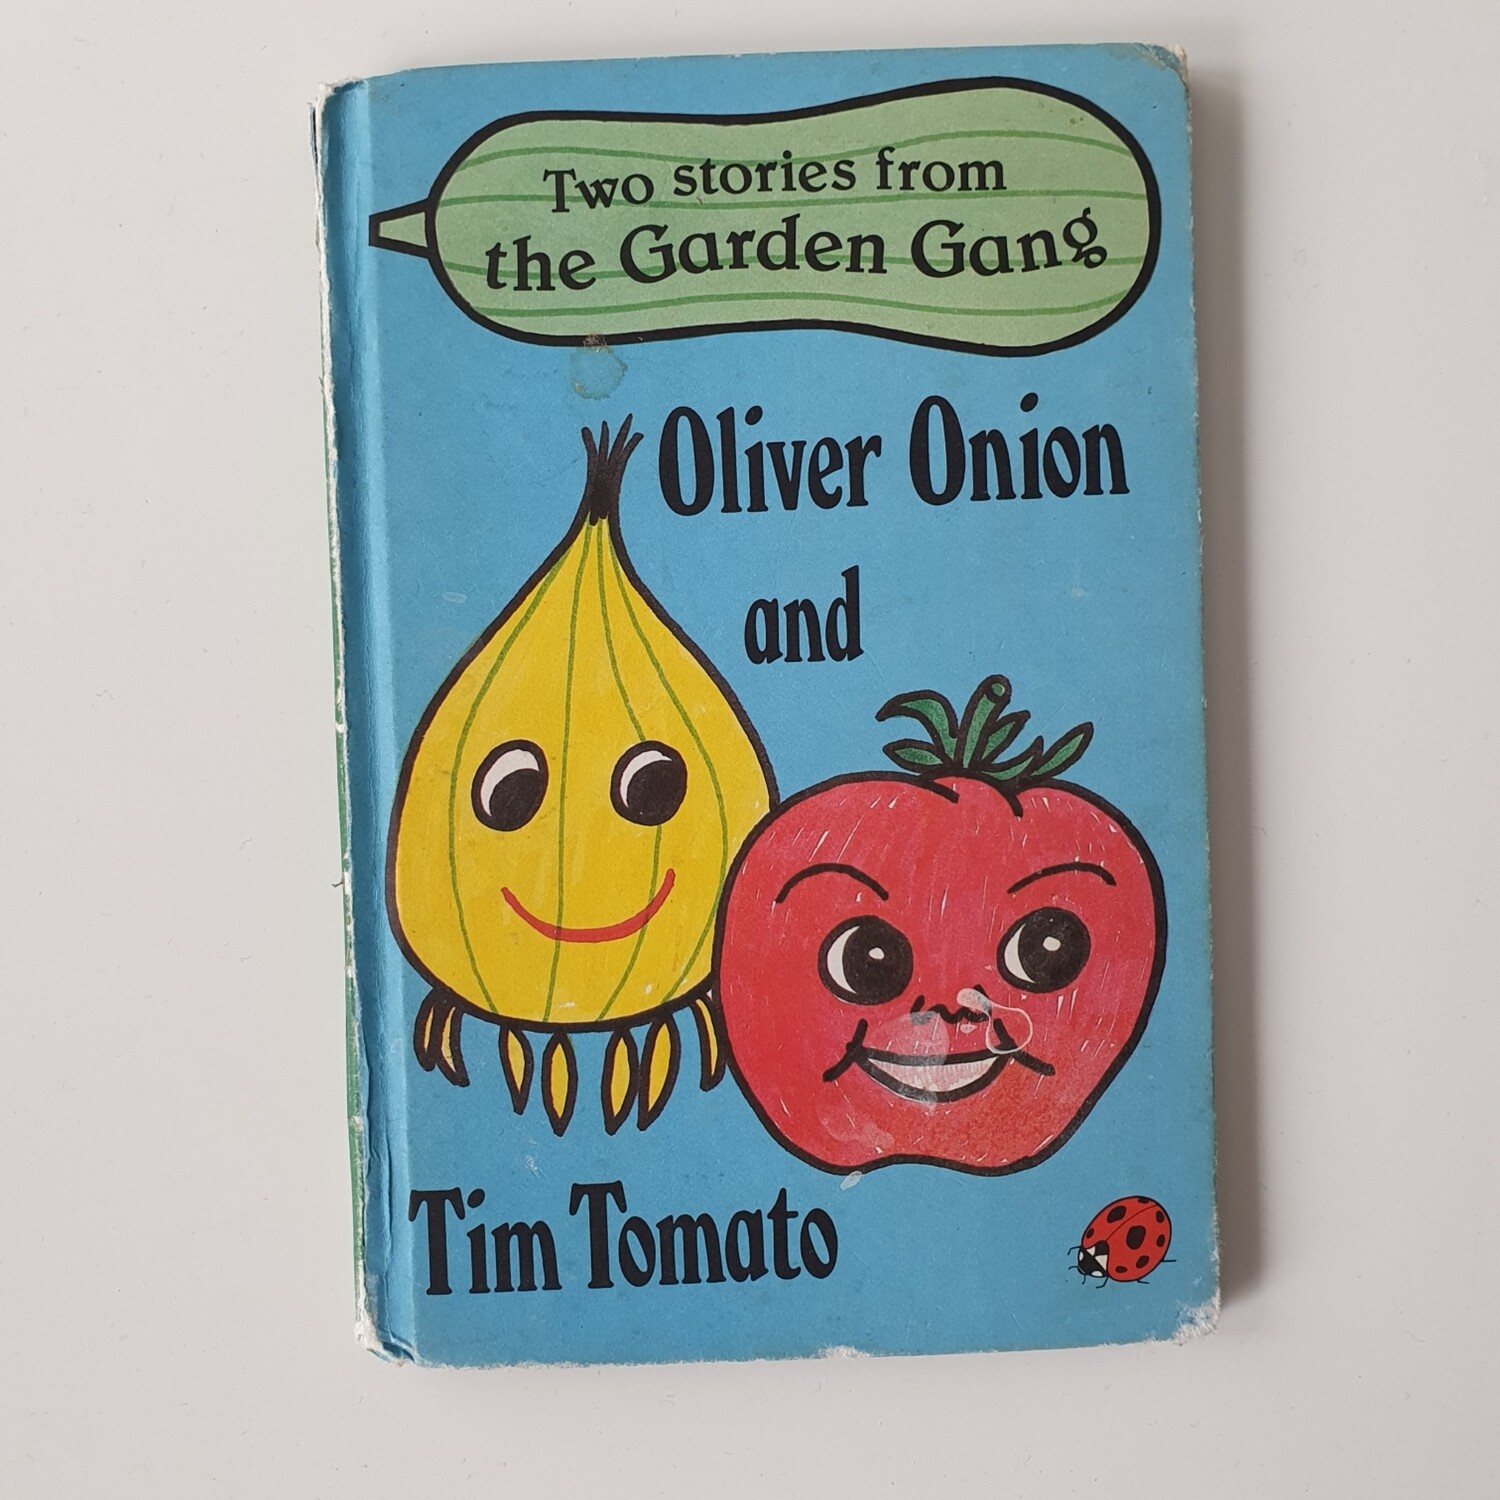 The Garden Gang - Oliver Onion and Tim Tomato